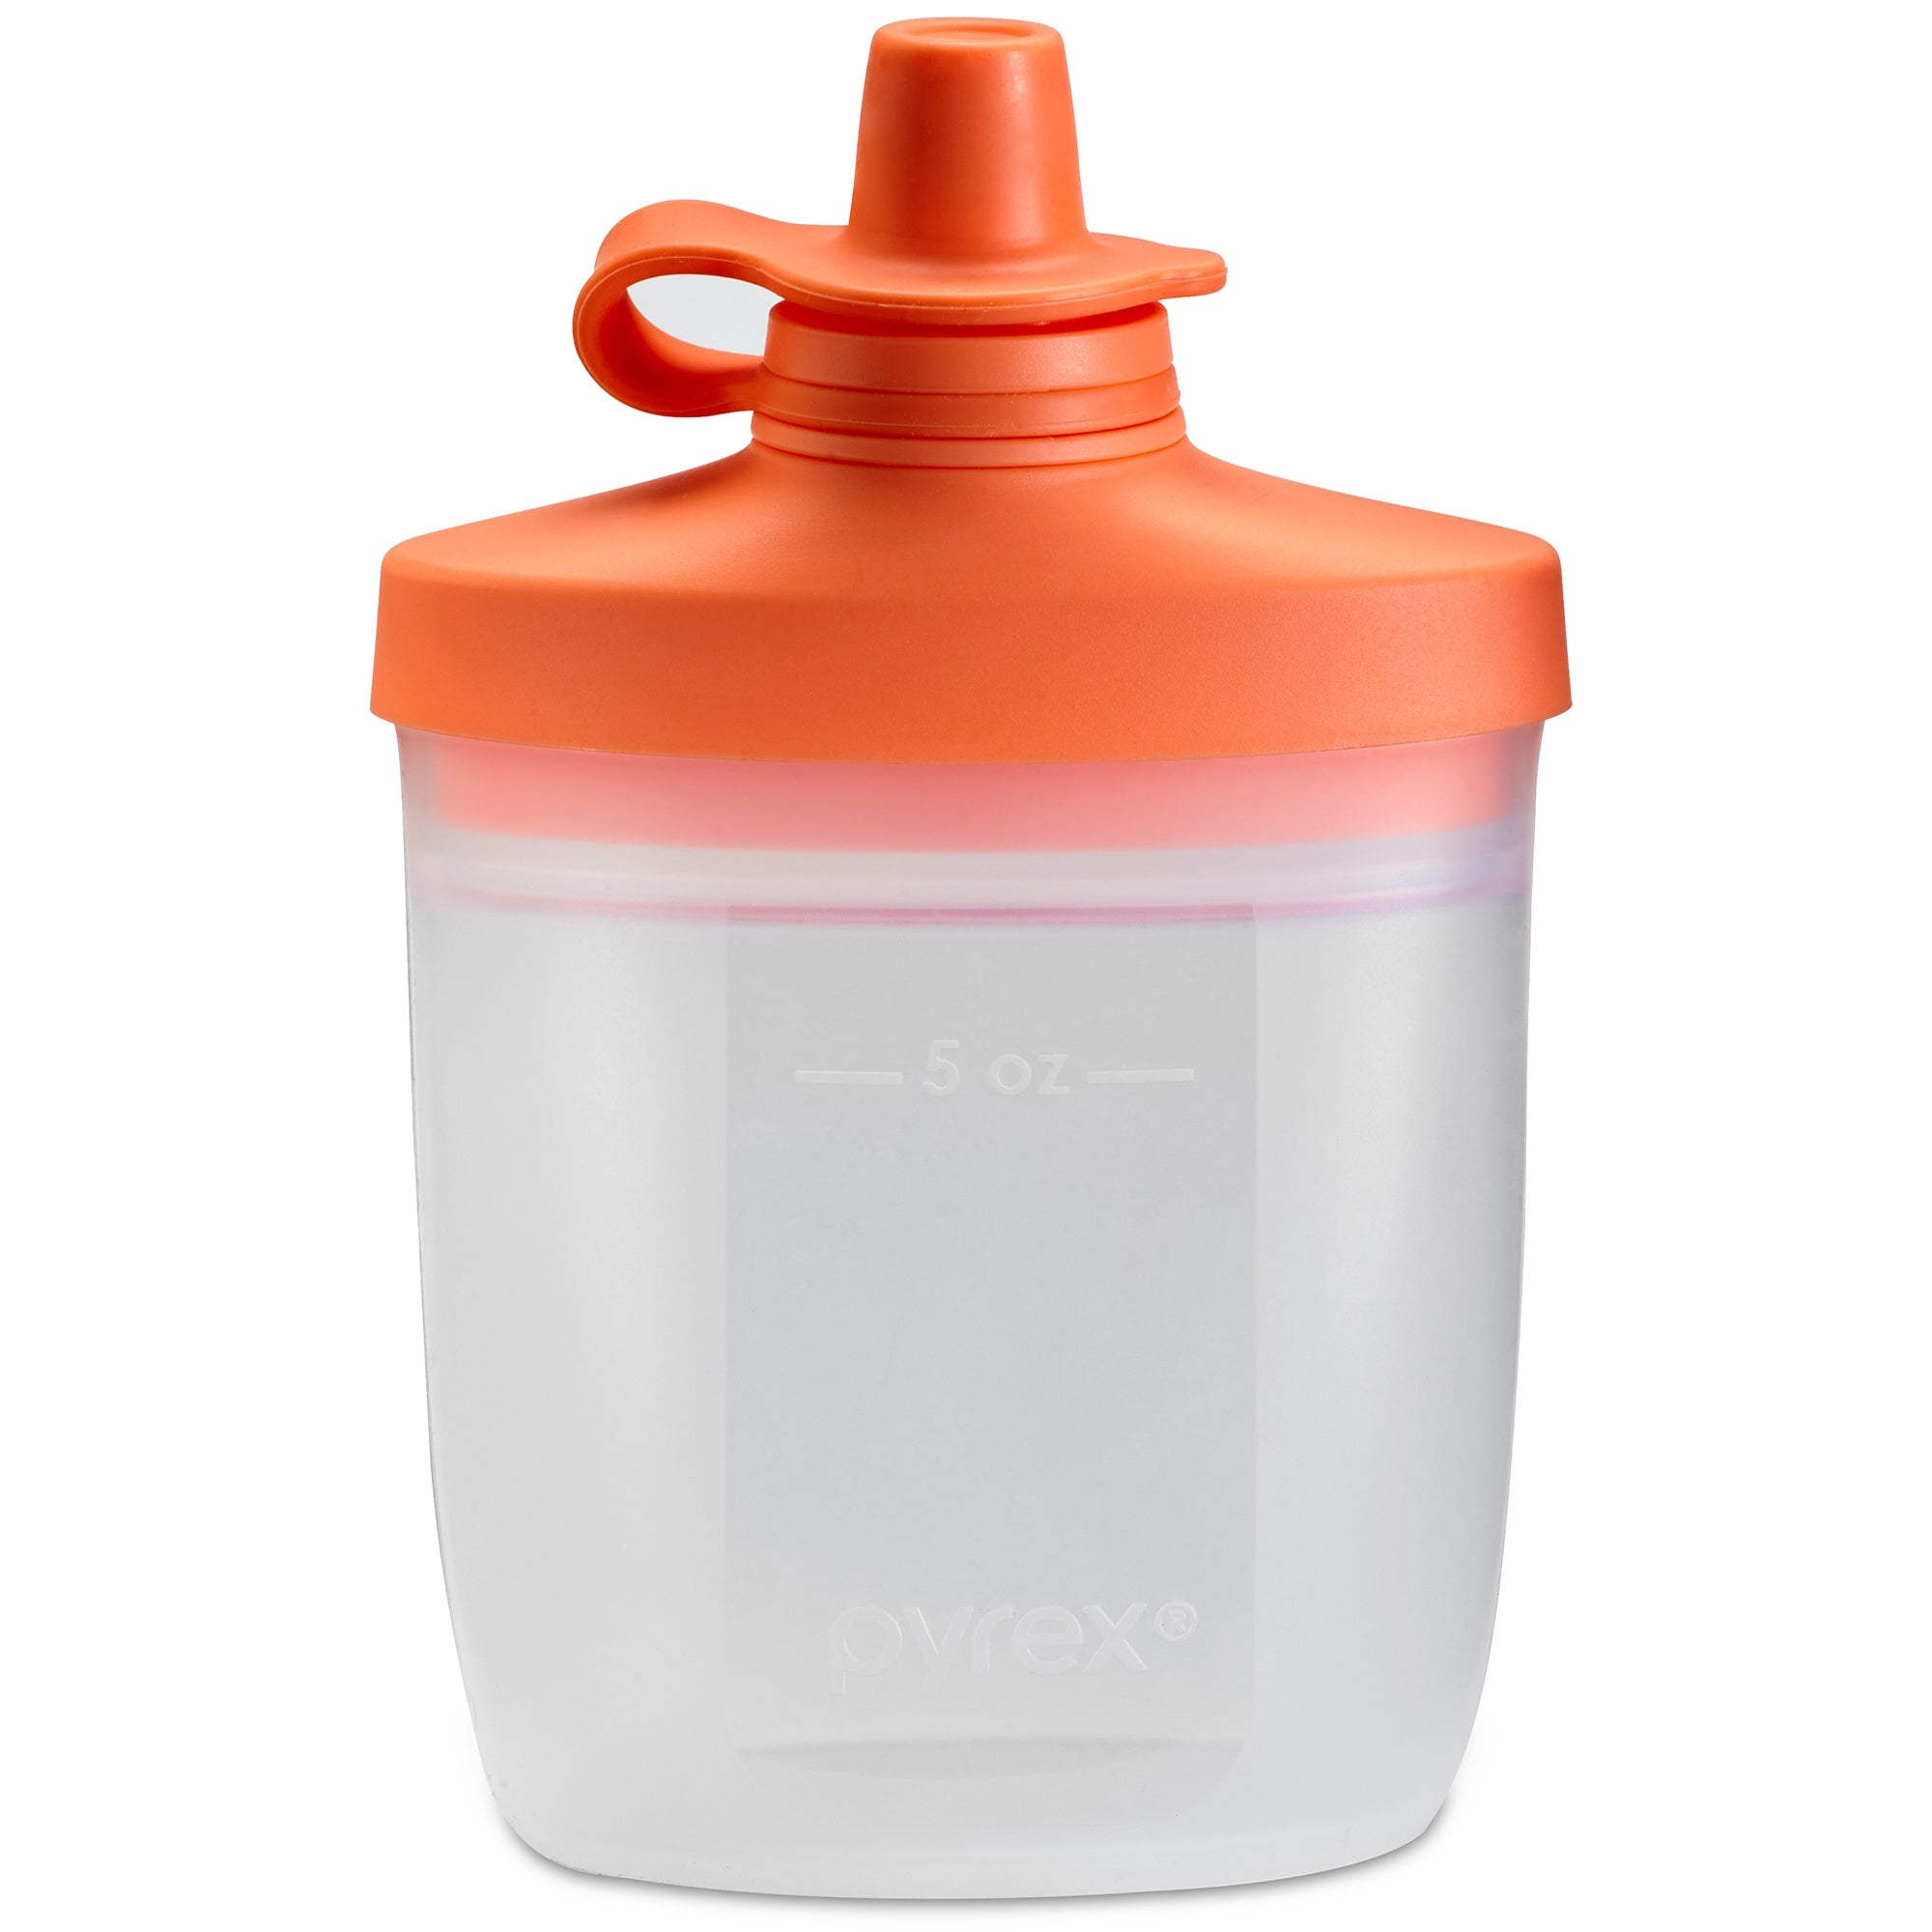 Pyrex® Littles Silicone Smoothie Pouch